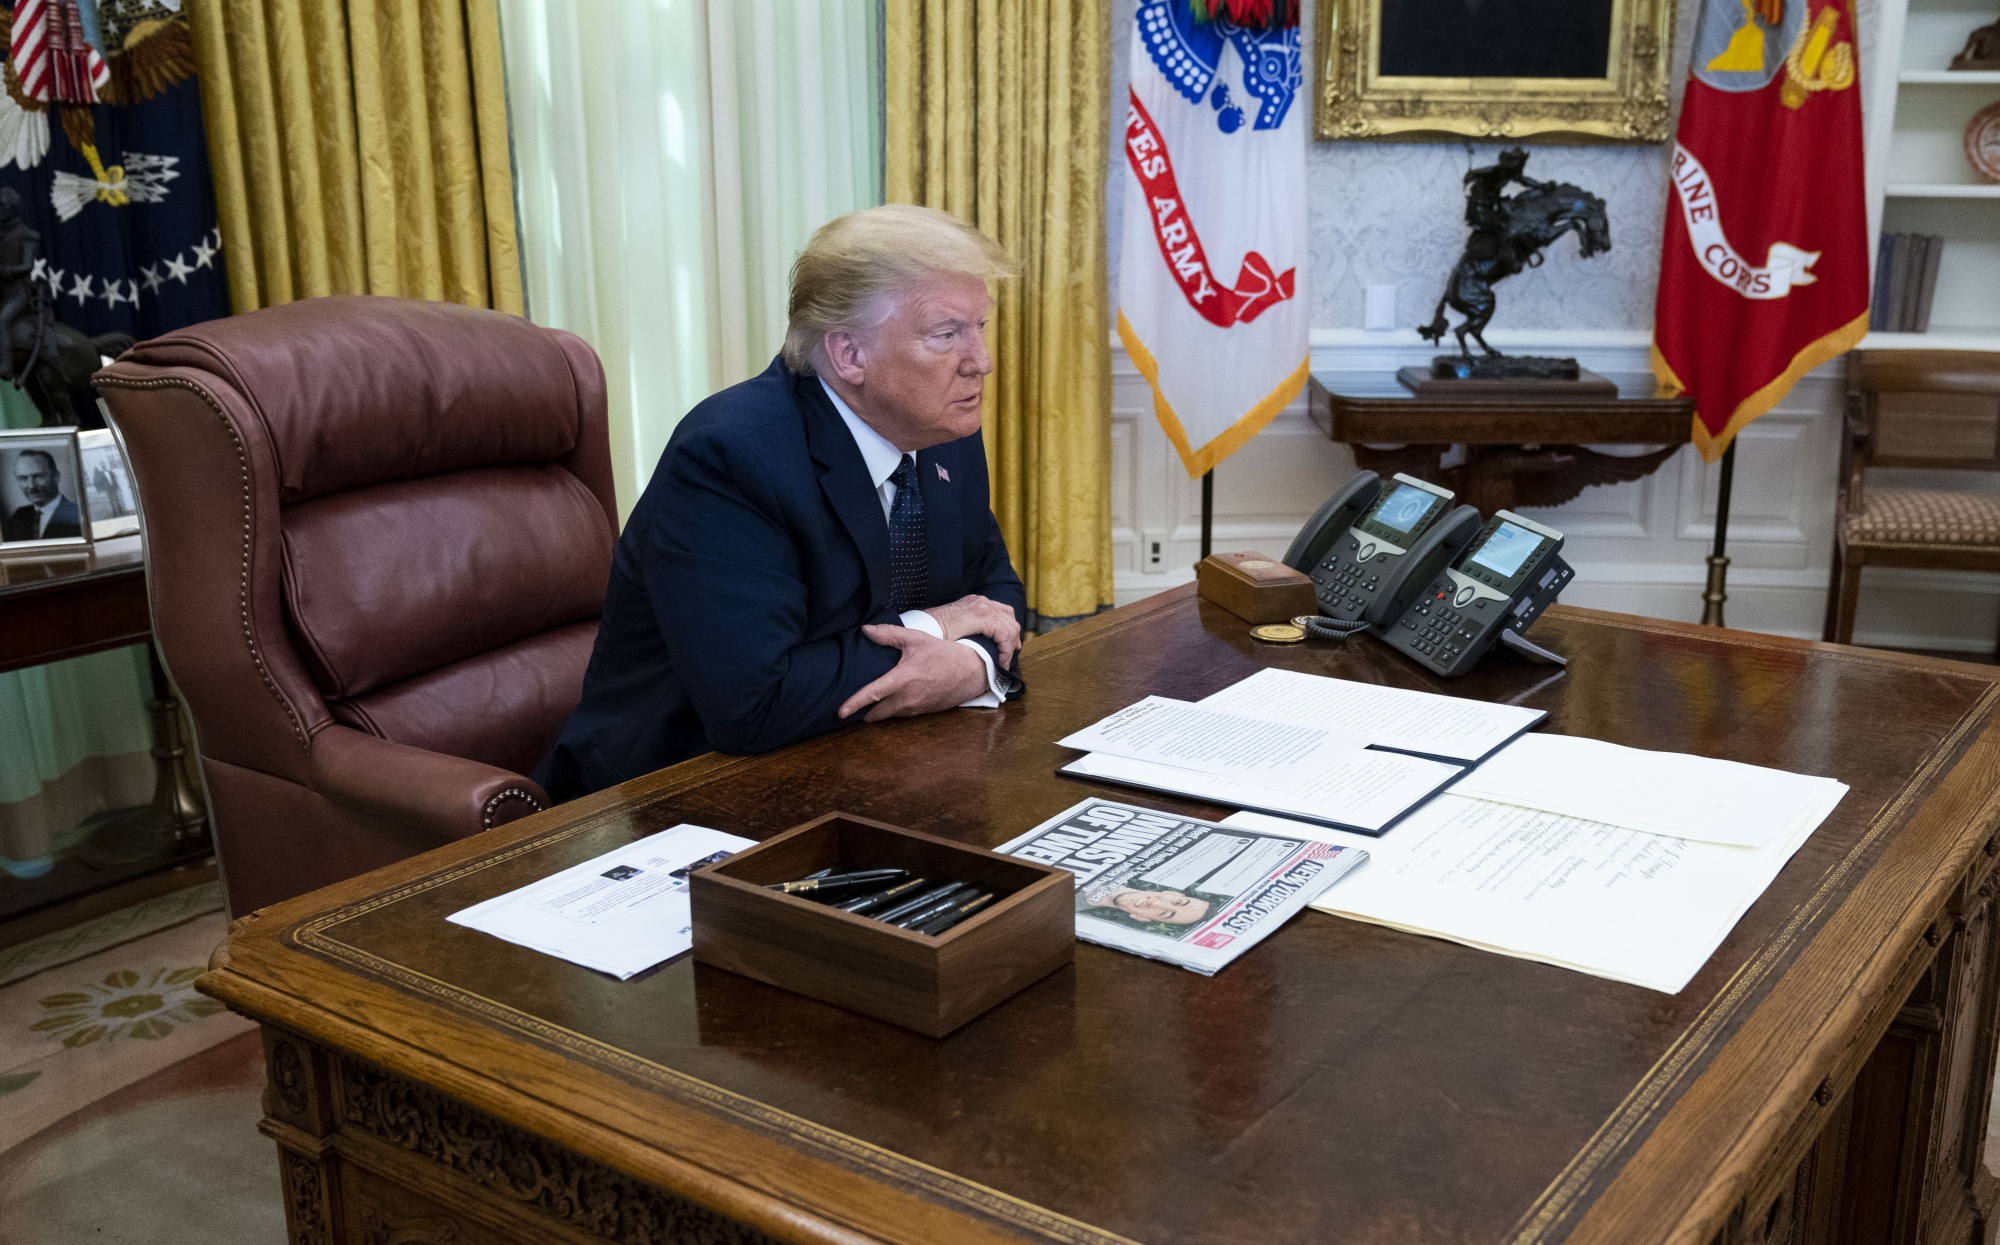 U.S. President Donald Trump sits before signing an executive order in Washington, D.C., U.S., on Thursday, May 28, 2020.